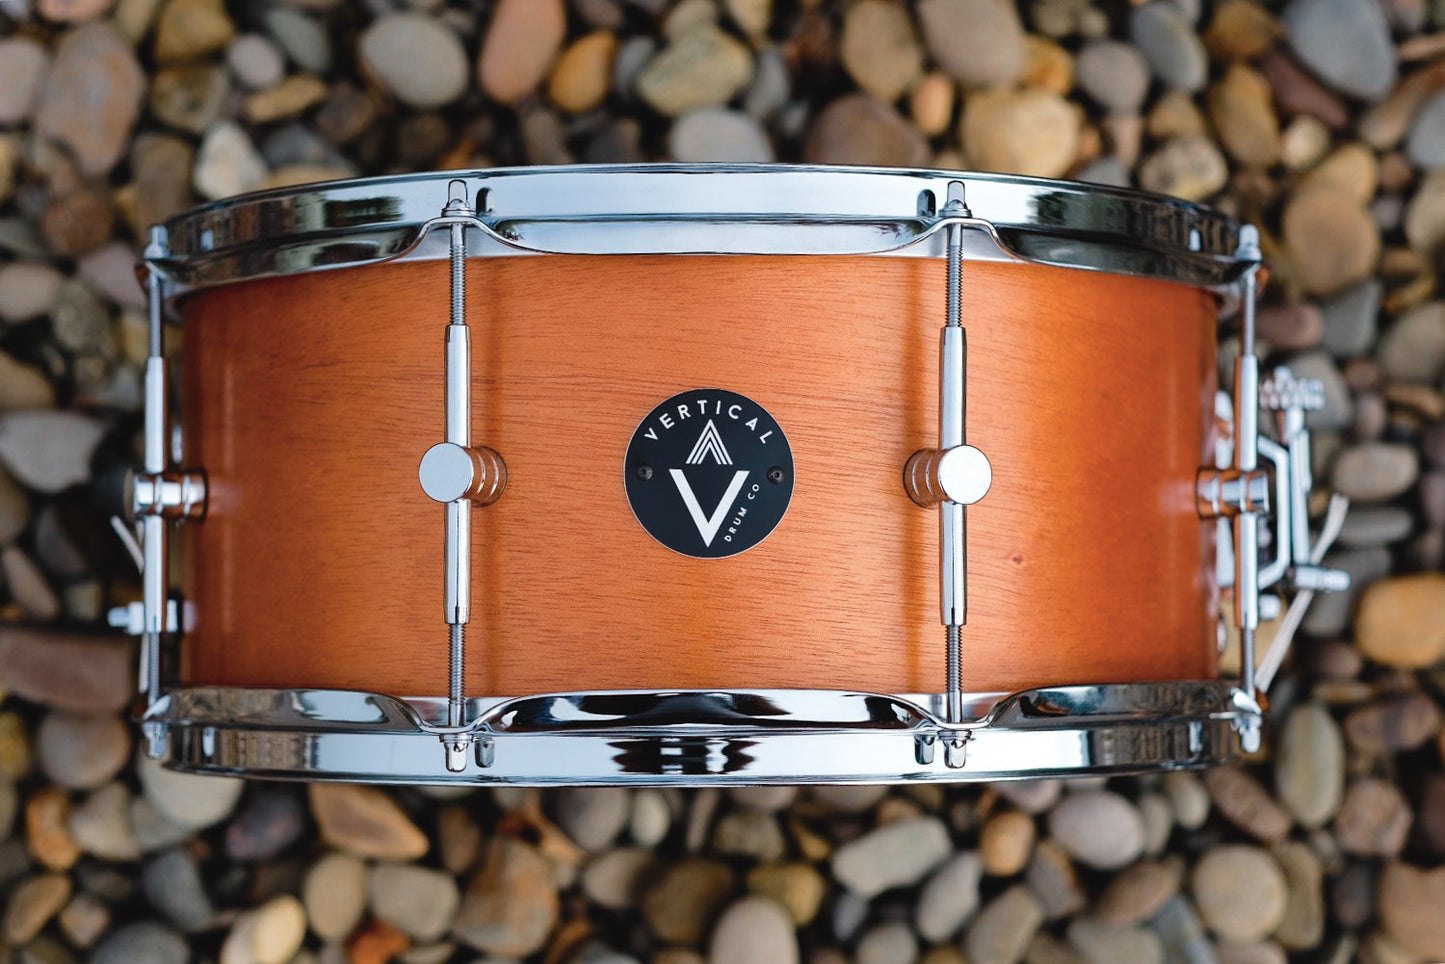 Vertical Drum Co. Intro 6.5×14” 6-Ply Snare Drum